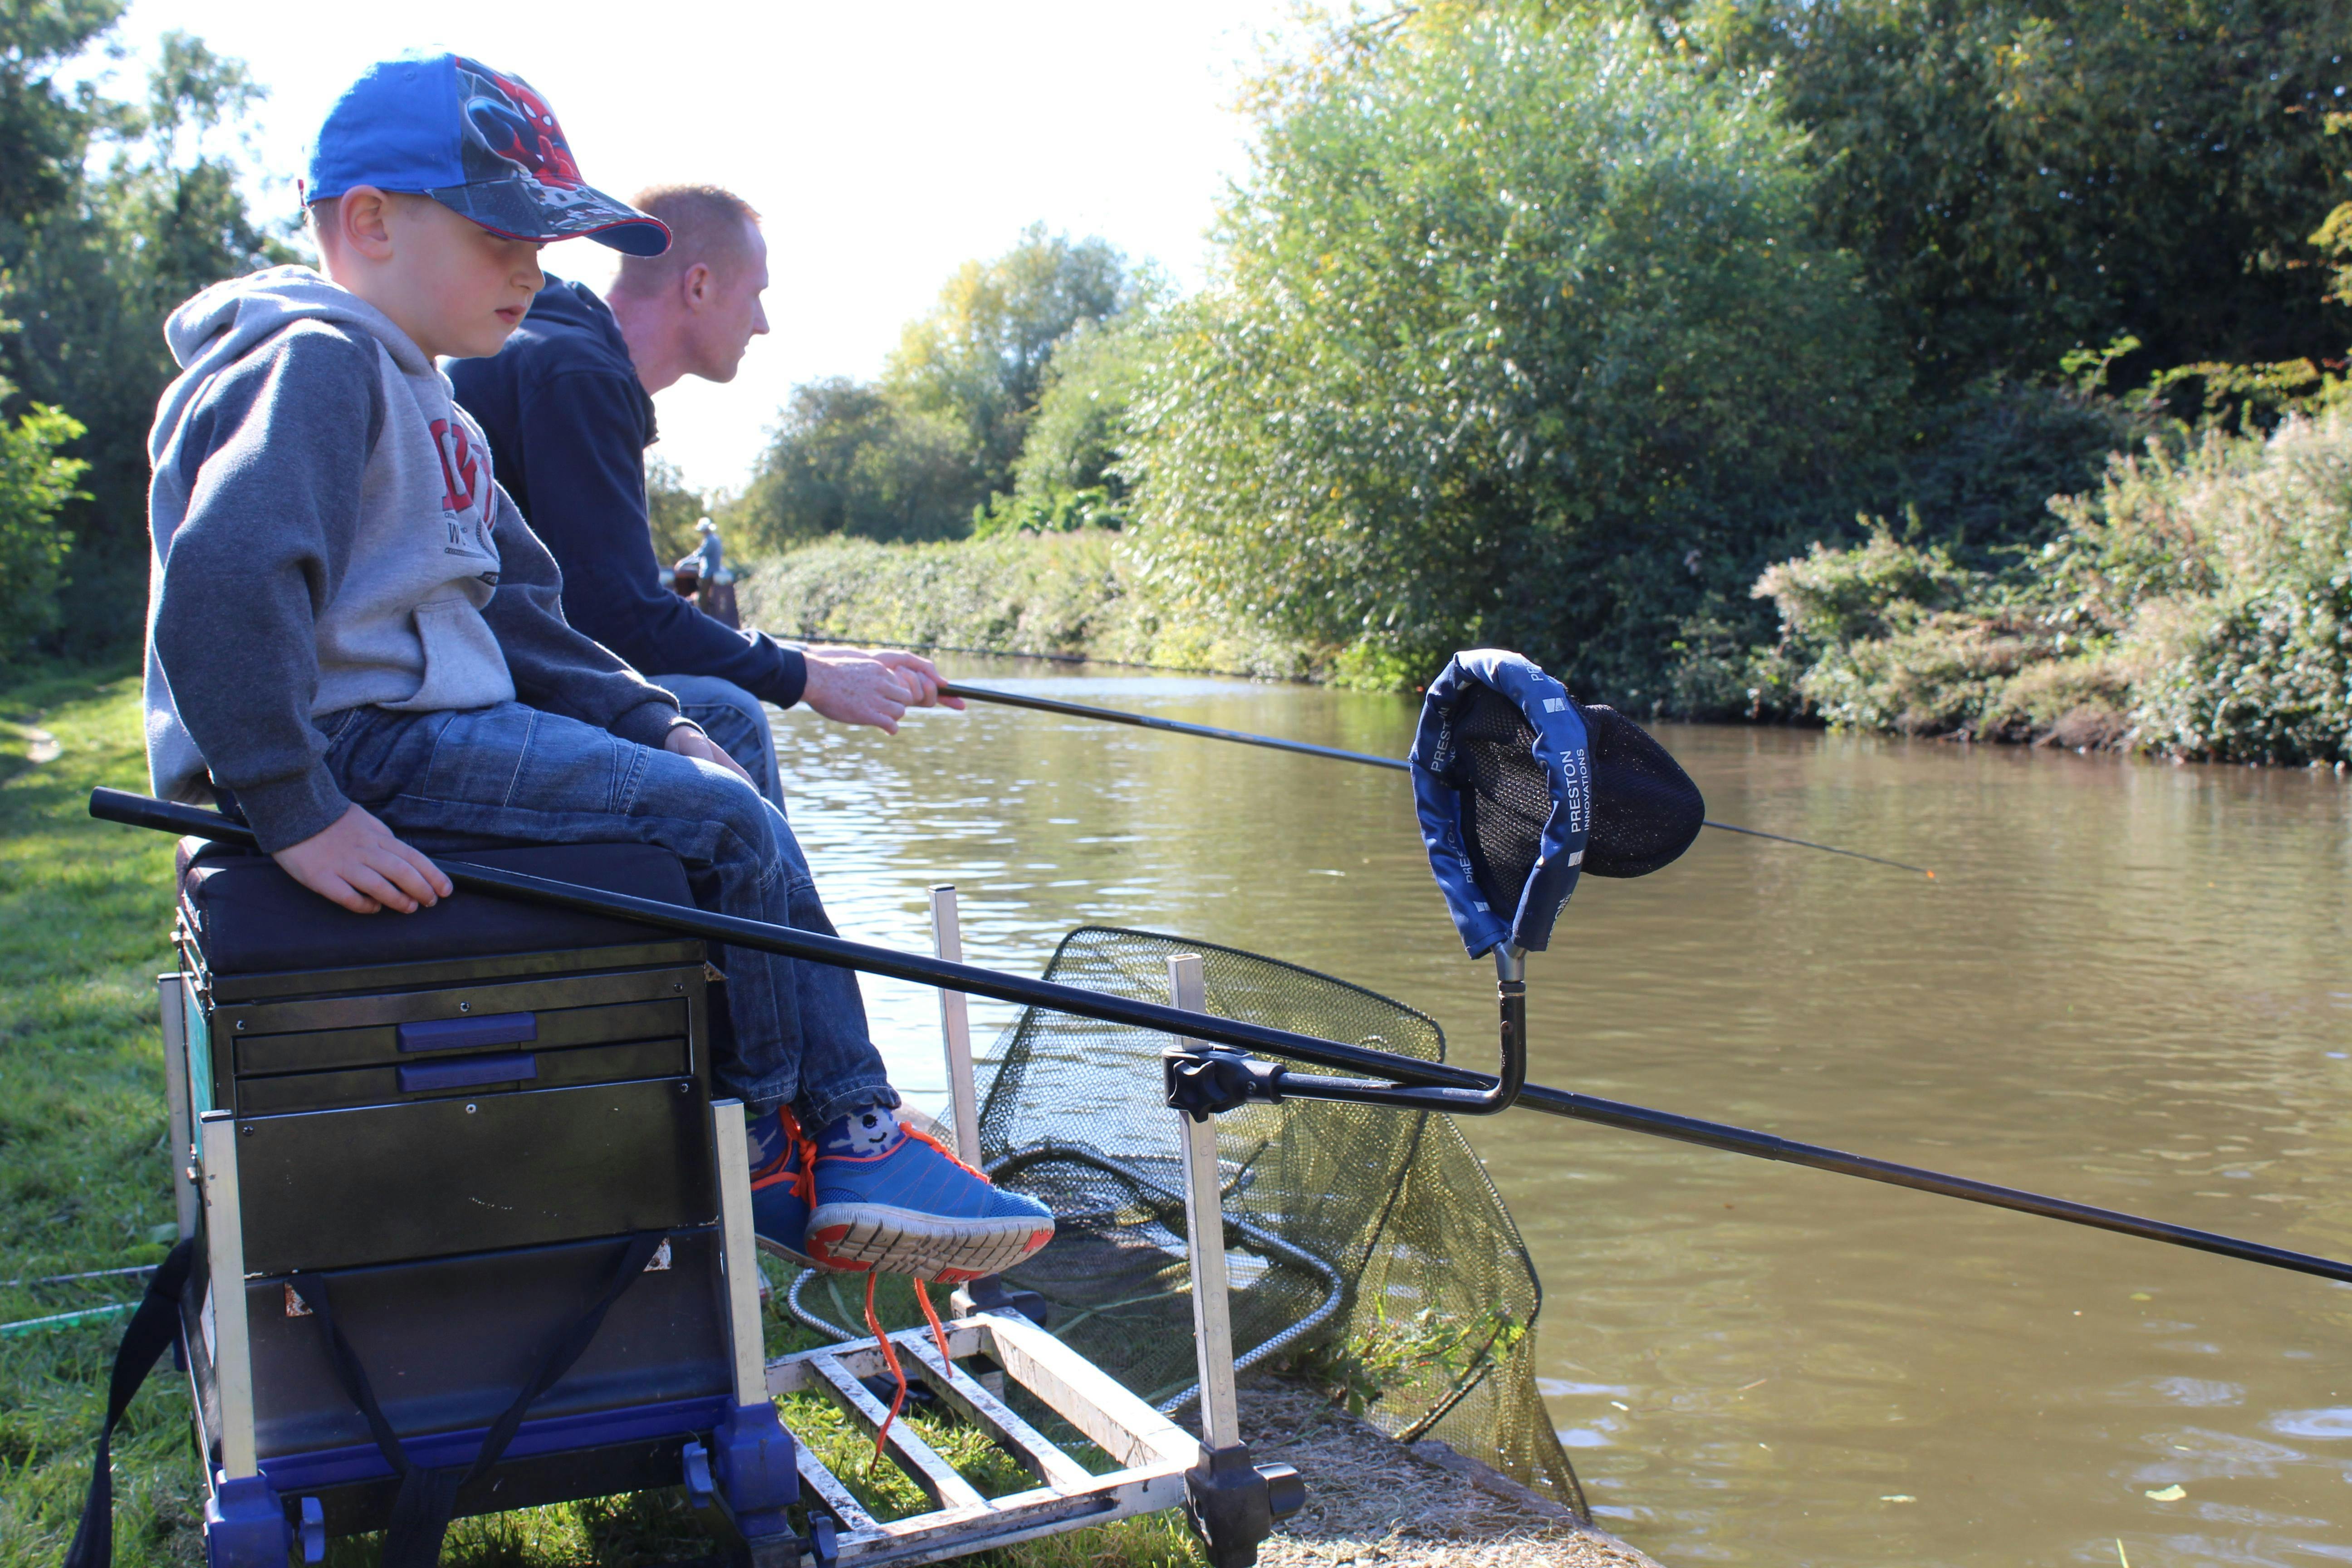 Free Let's Fish! - Devizes - Learn to Fish Sessions - Kennet & Avon Canal